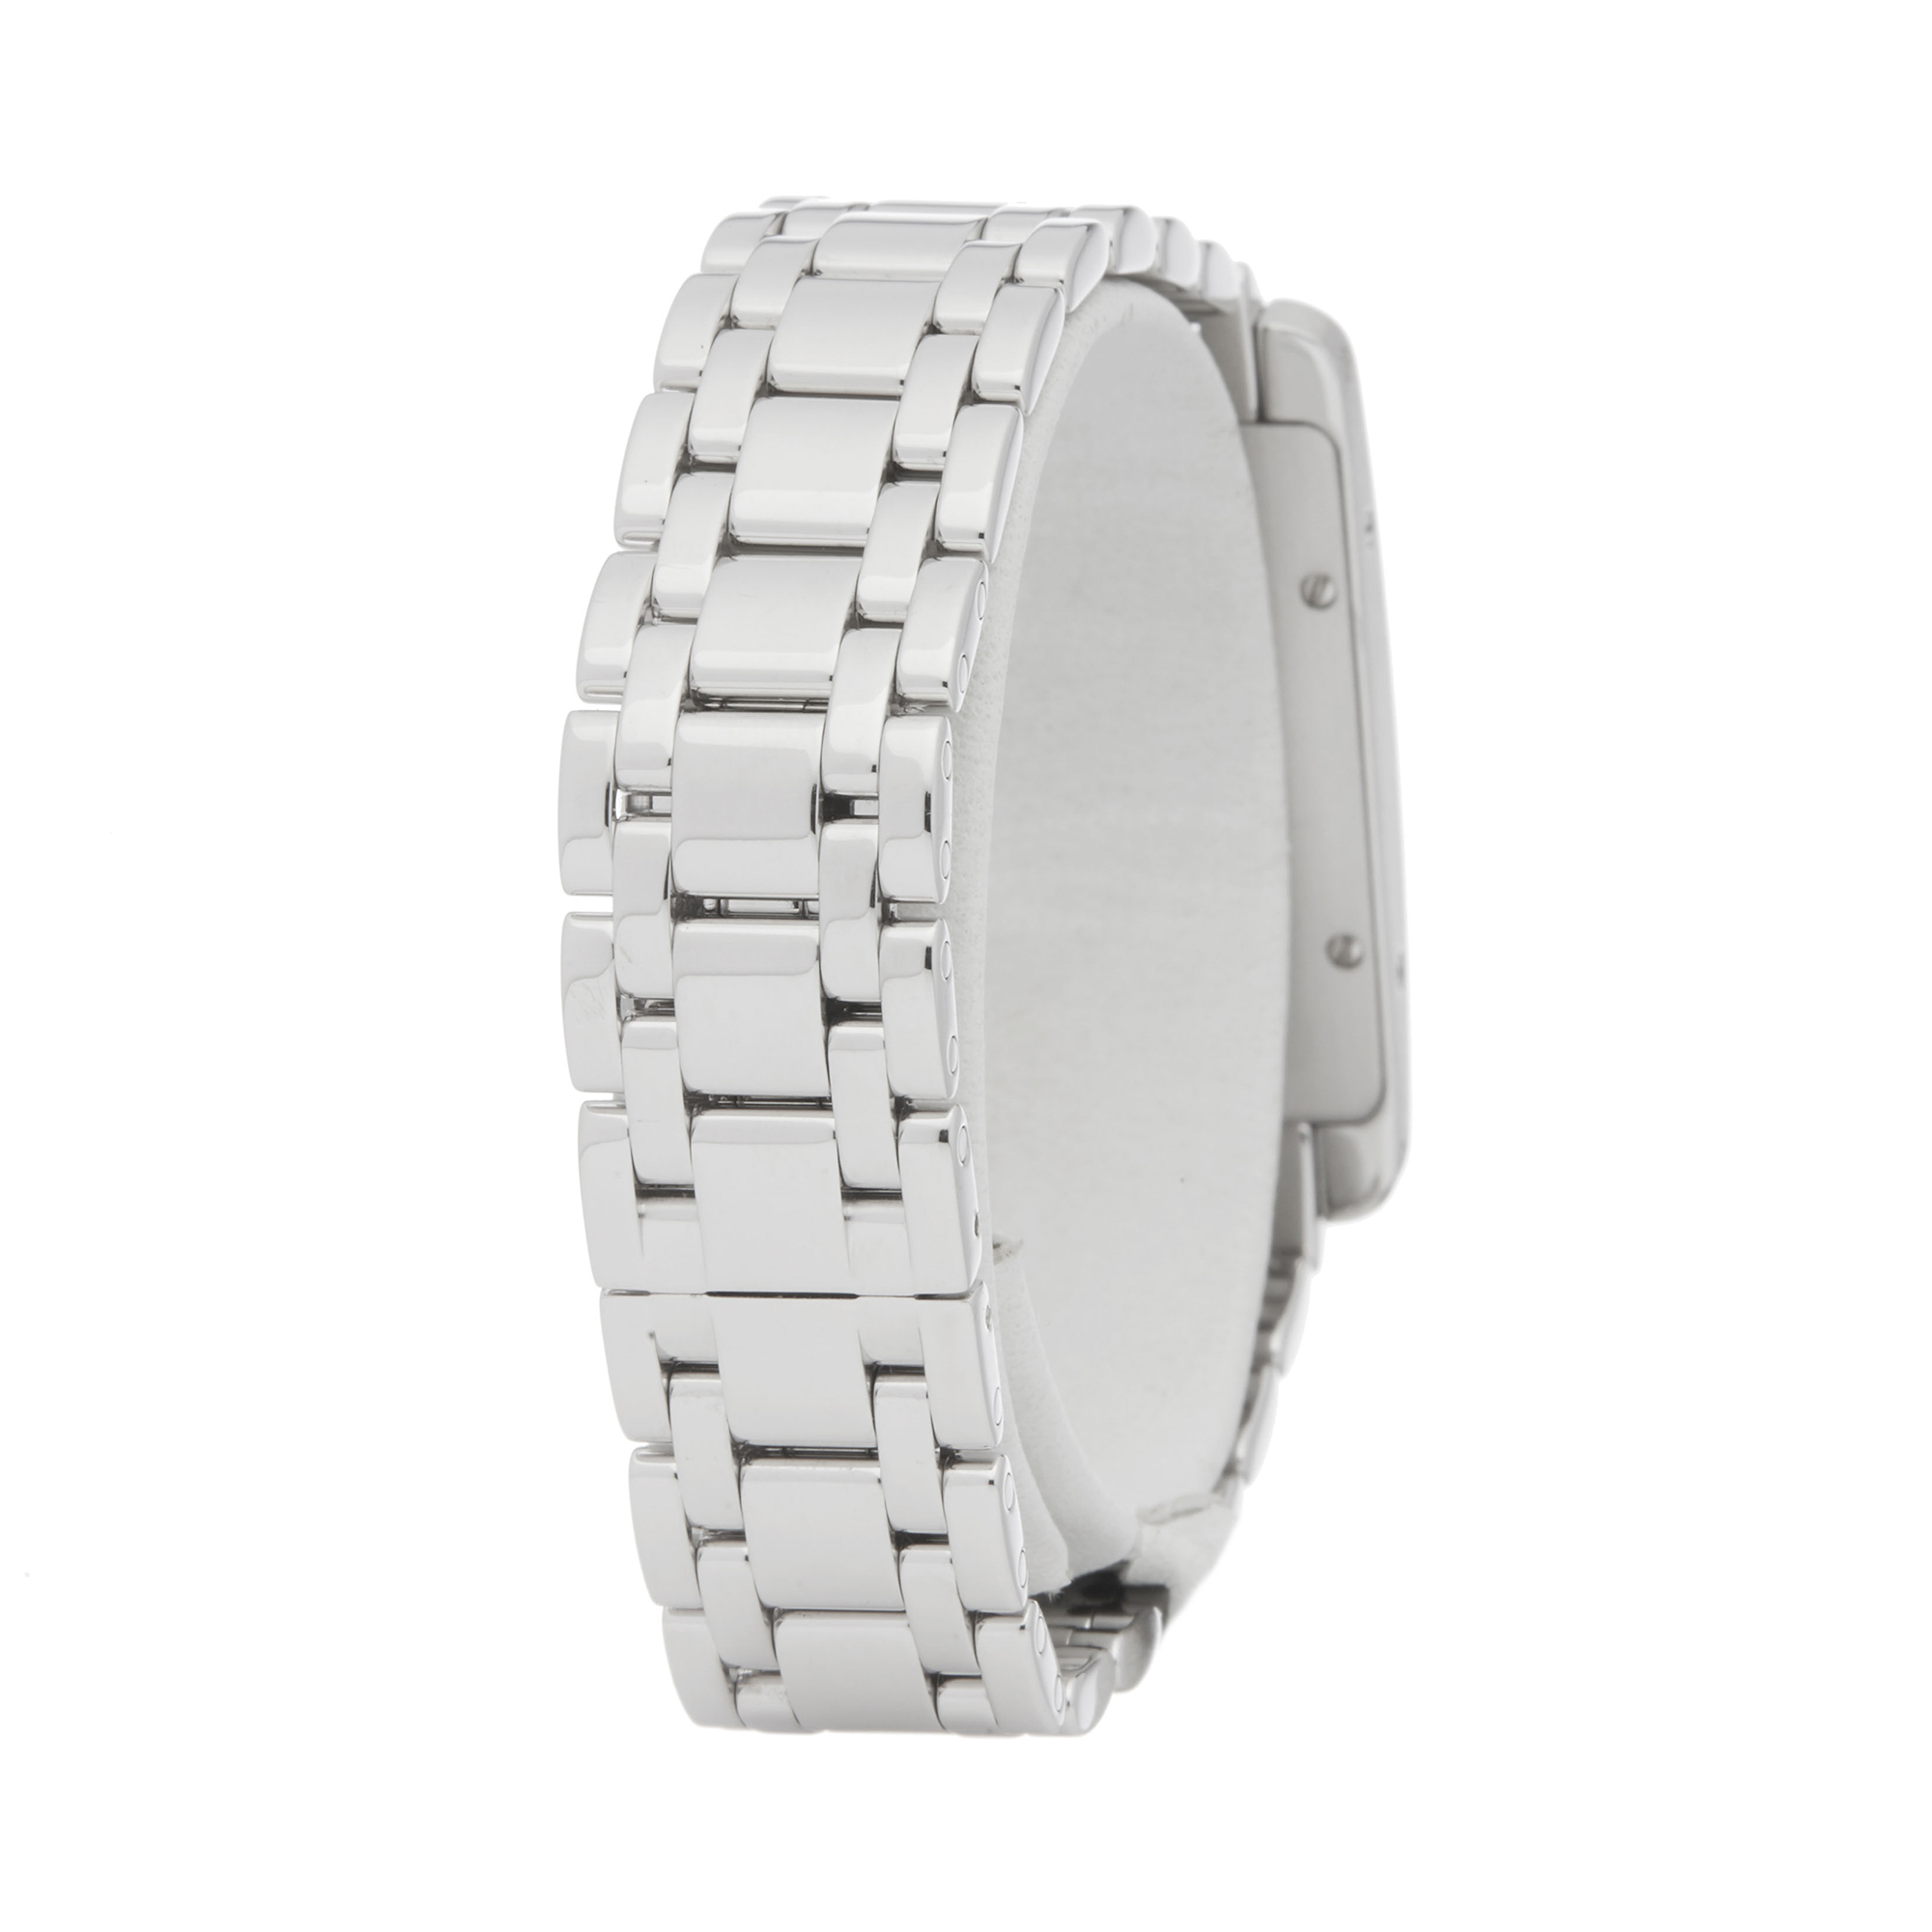 Cartier Tank Americaine W26019L1 or 1713 Ladies White Gold Watch - Image 6 of 9